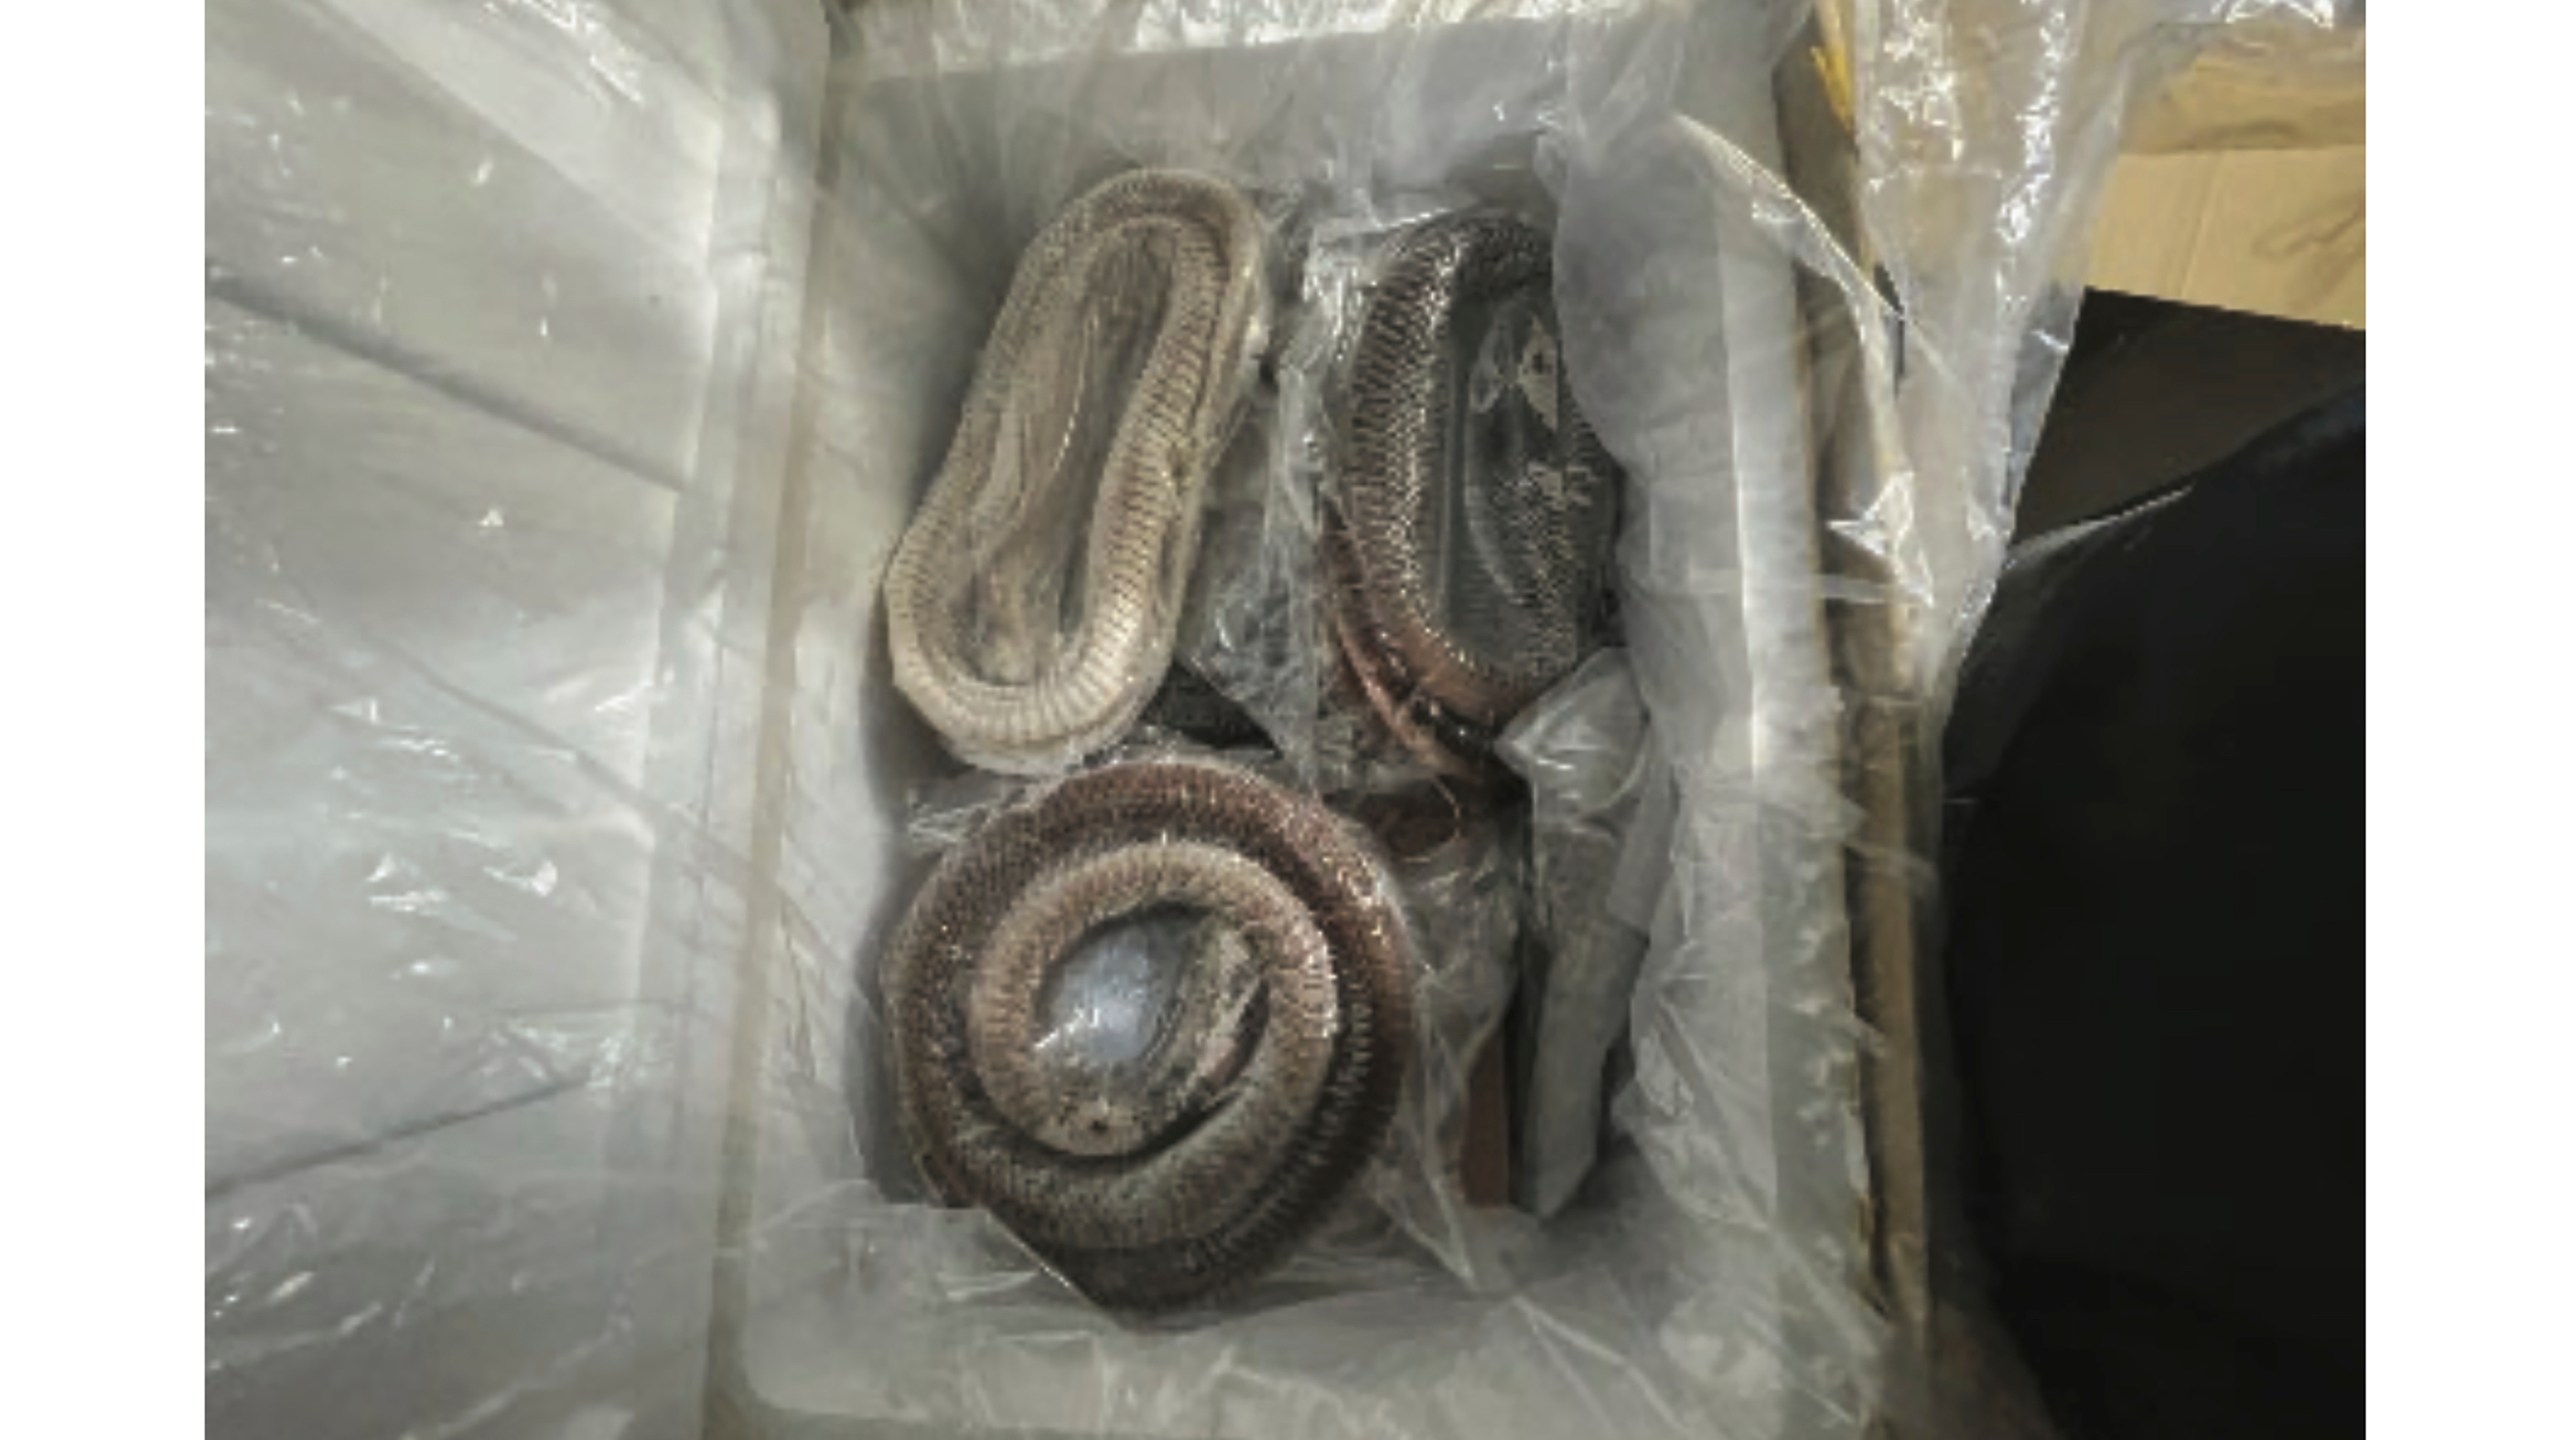 This November 2022 photo provided by the United States Attorney's office, shows packaged snake meat that was found in an illegal shipment in New York of duck and goose intestines from China. Six people were arrested in New York on Tuesday, March 5, 2024 on charges of illegally importing goose and duck intestines from China, in some cases by hiding them under packaged rattlesnakes or mislabeling them as pet grooming products on customs forms, federal officials announced.(US Attorney's Office, EDNY via AP)